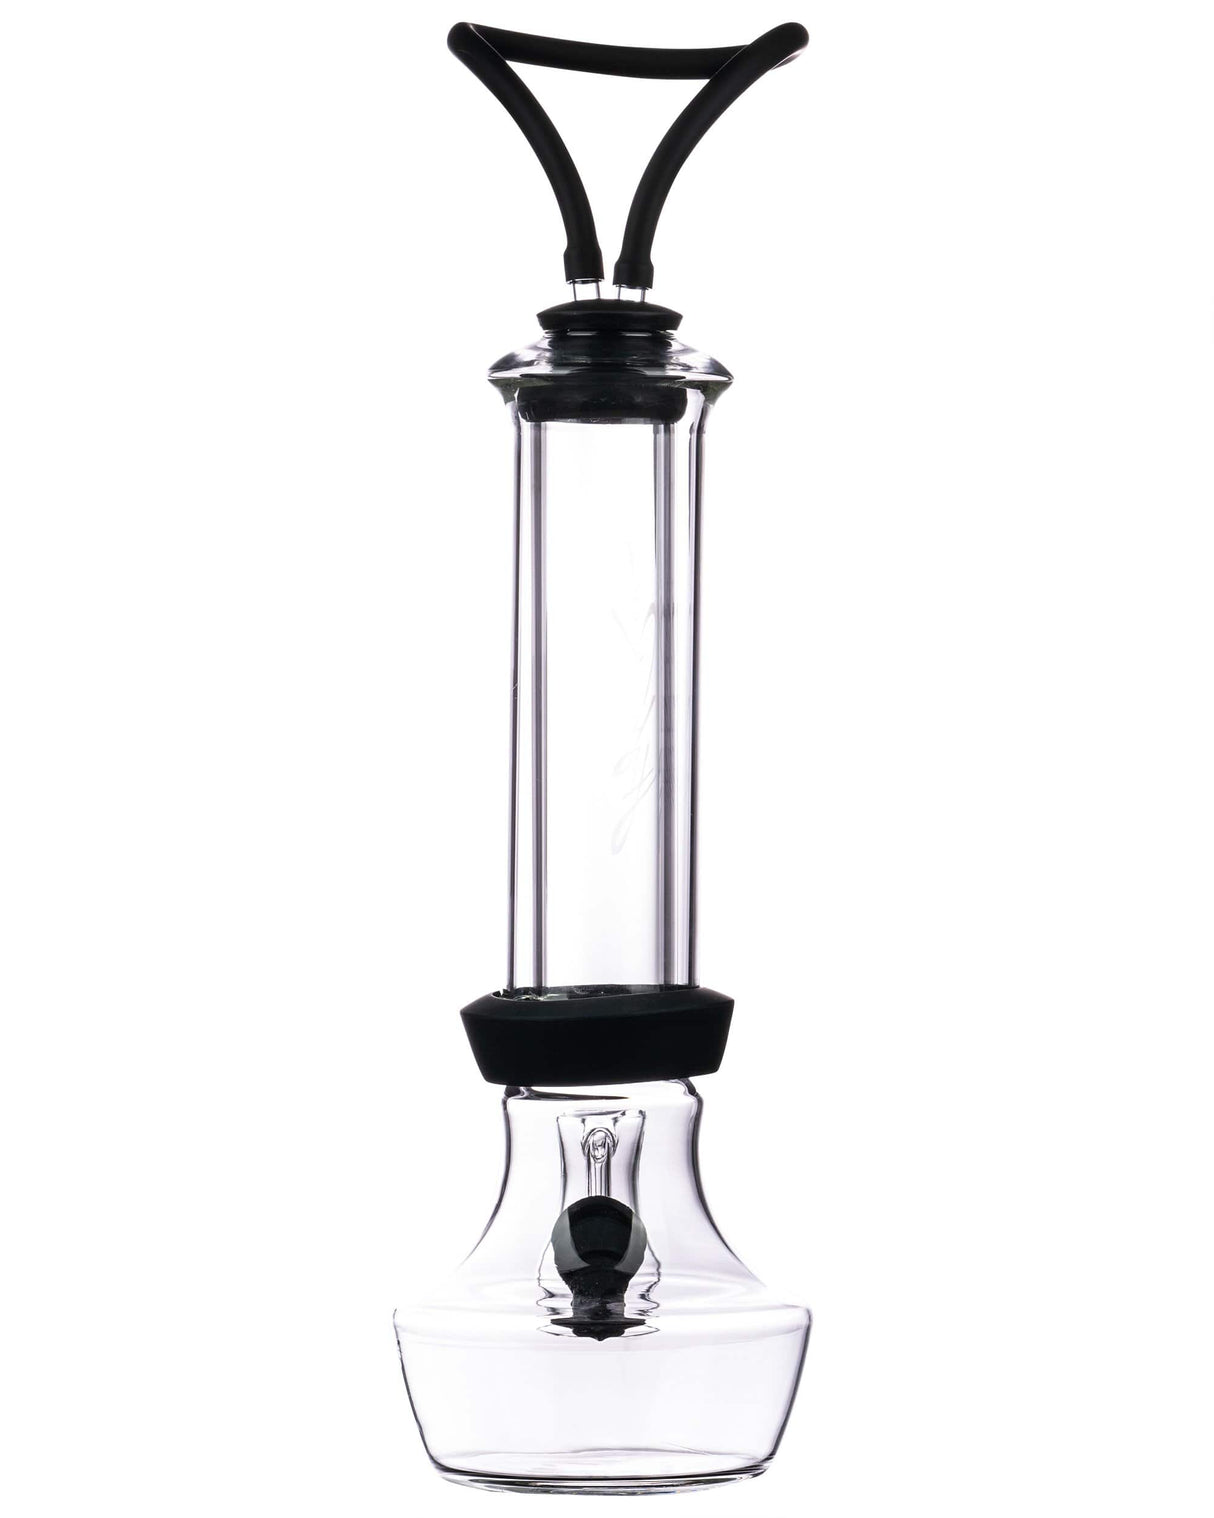 HighRise Gravity Bong in clear borosilicate glass with silicone base, front view on white background